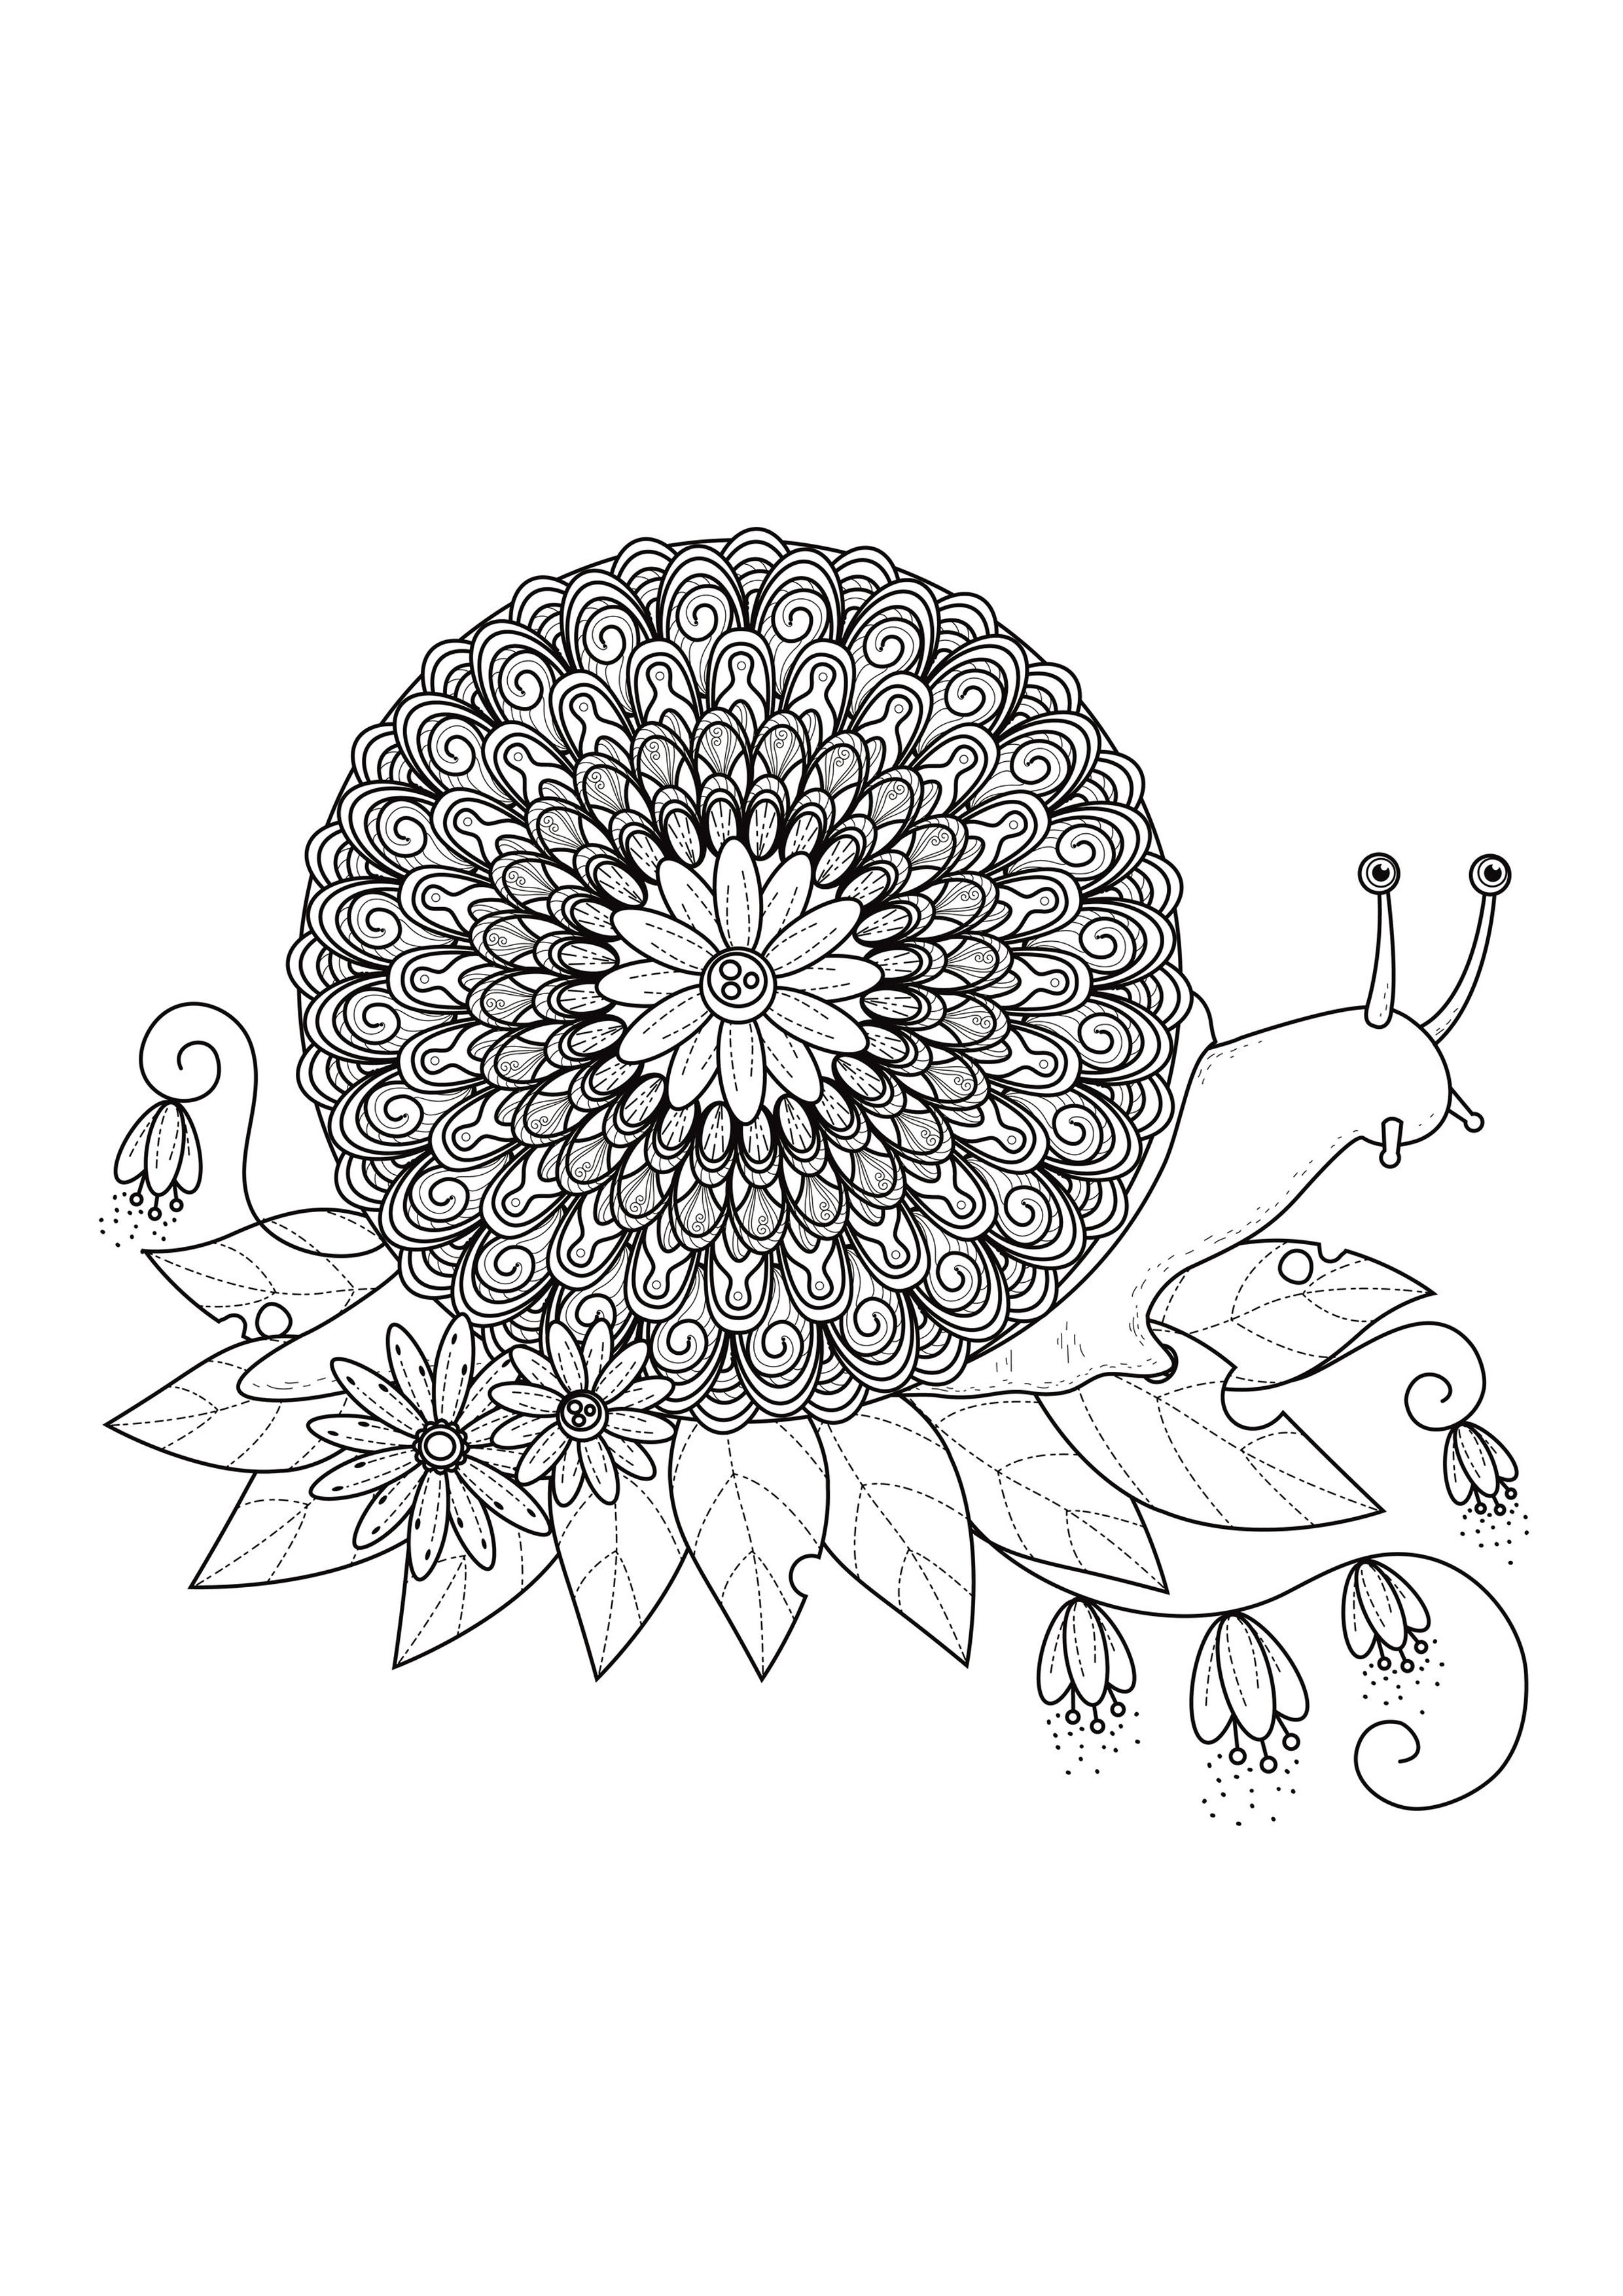 A Mandala quite difficult to color, instead of the shell of a snail, perfect if you like to color small areas, and if you like various details.